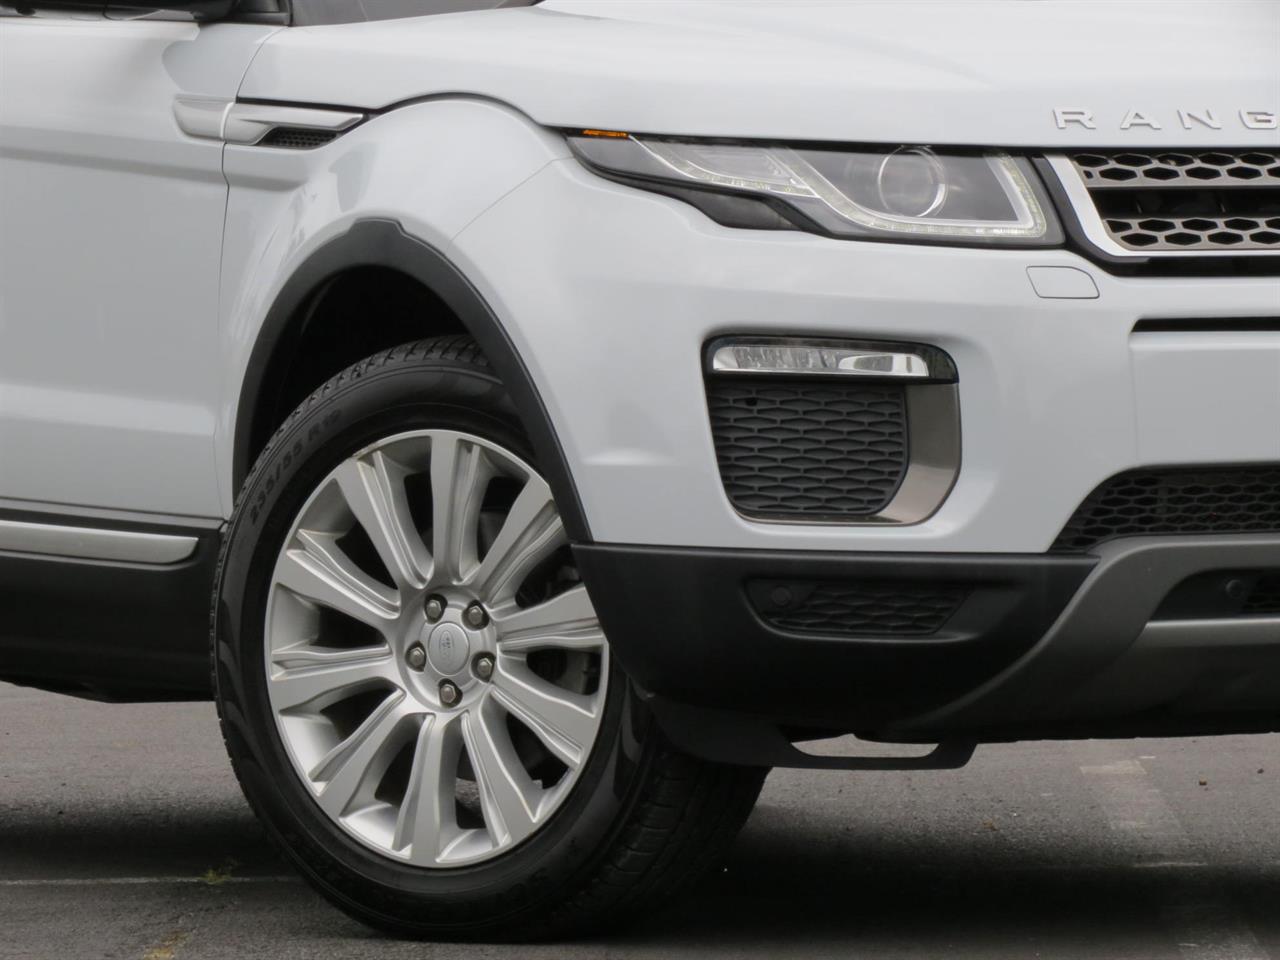 2016 Land Rover Range Rover Evoque only $127 weekly